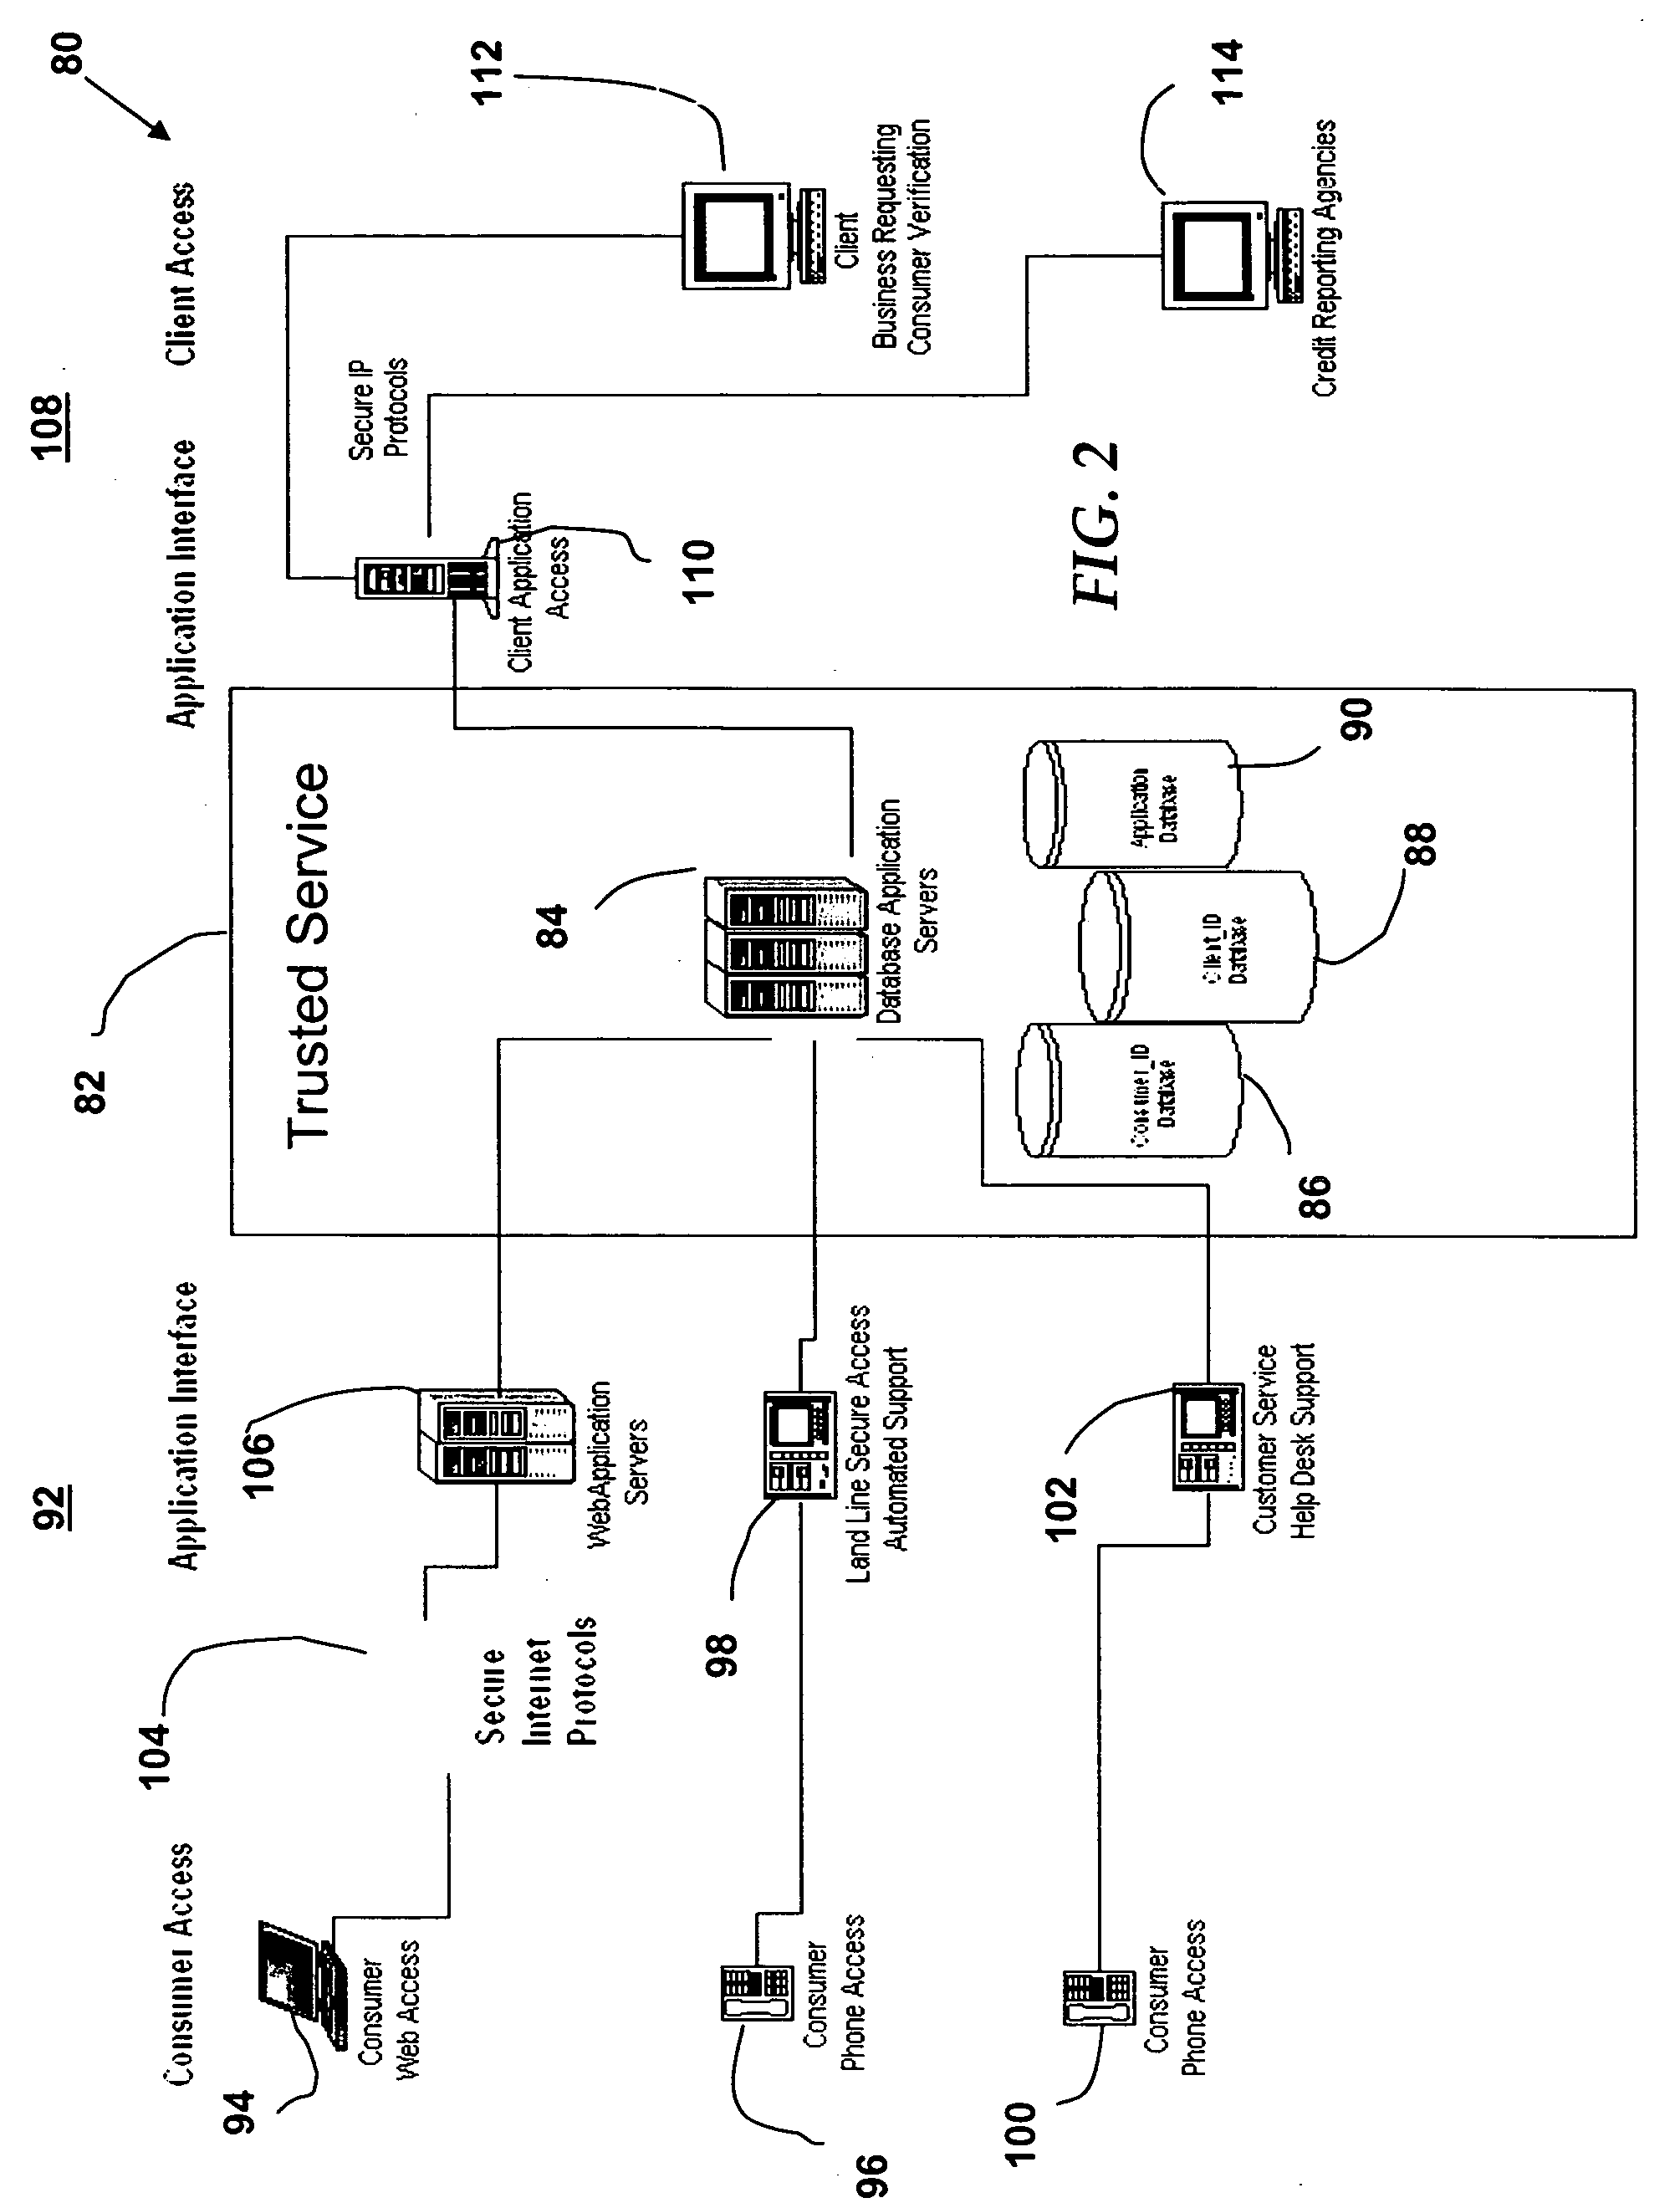 Method and system for preventing identity theft in electronic communications